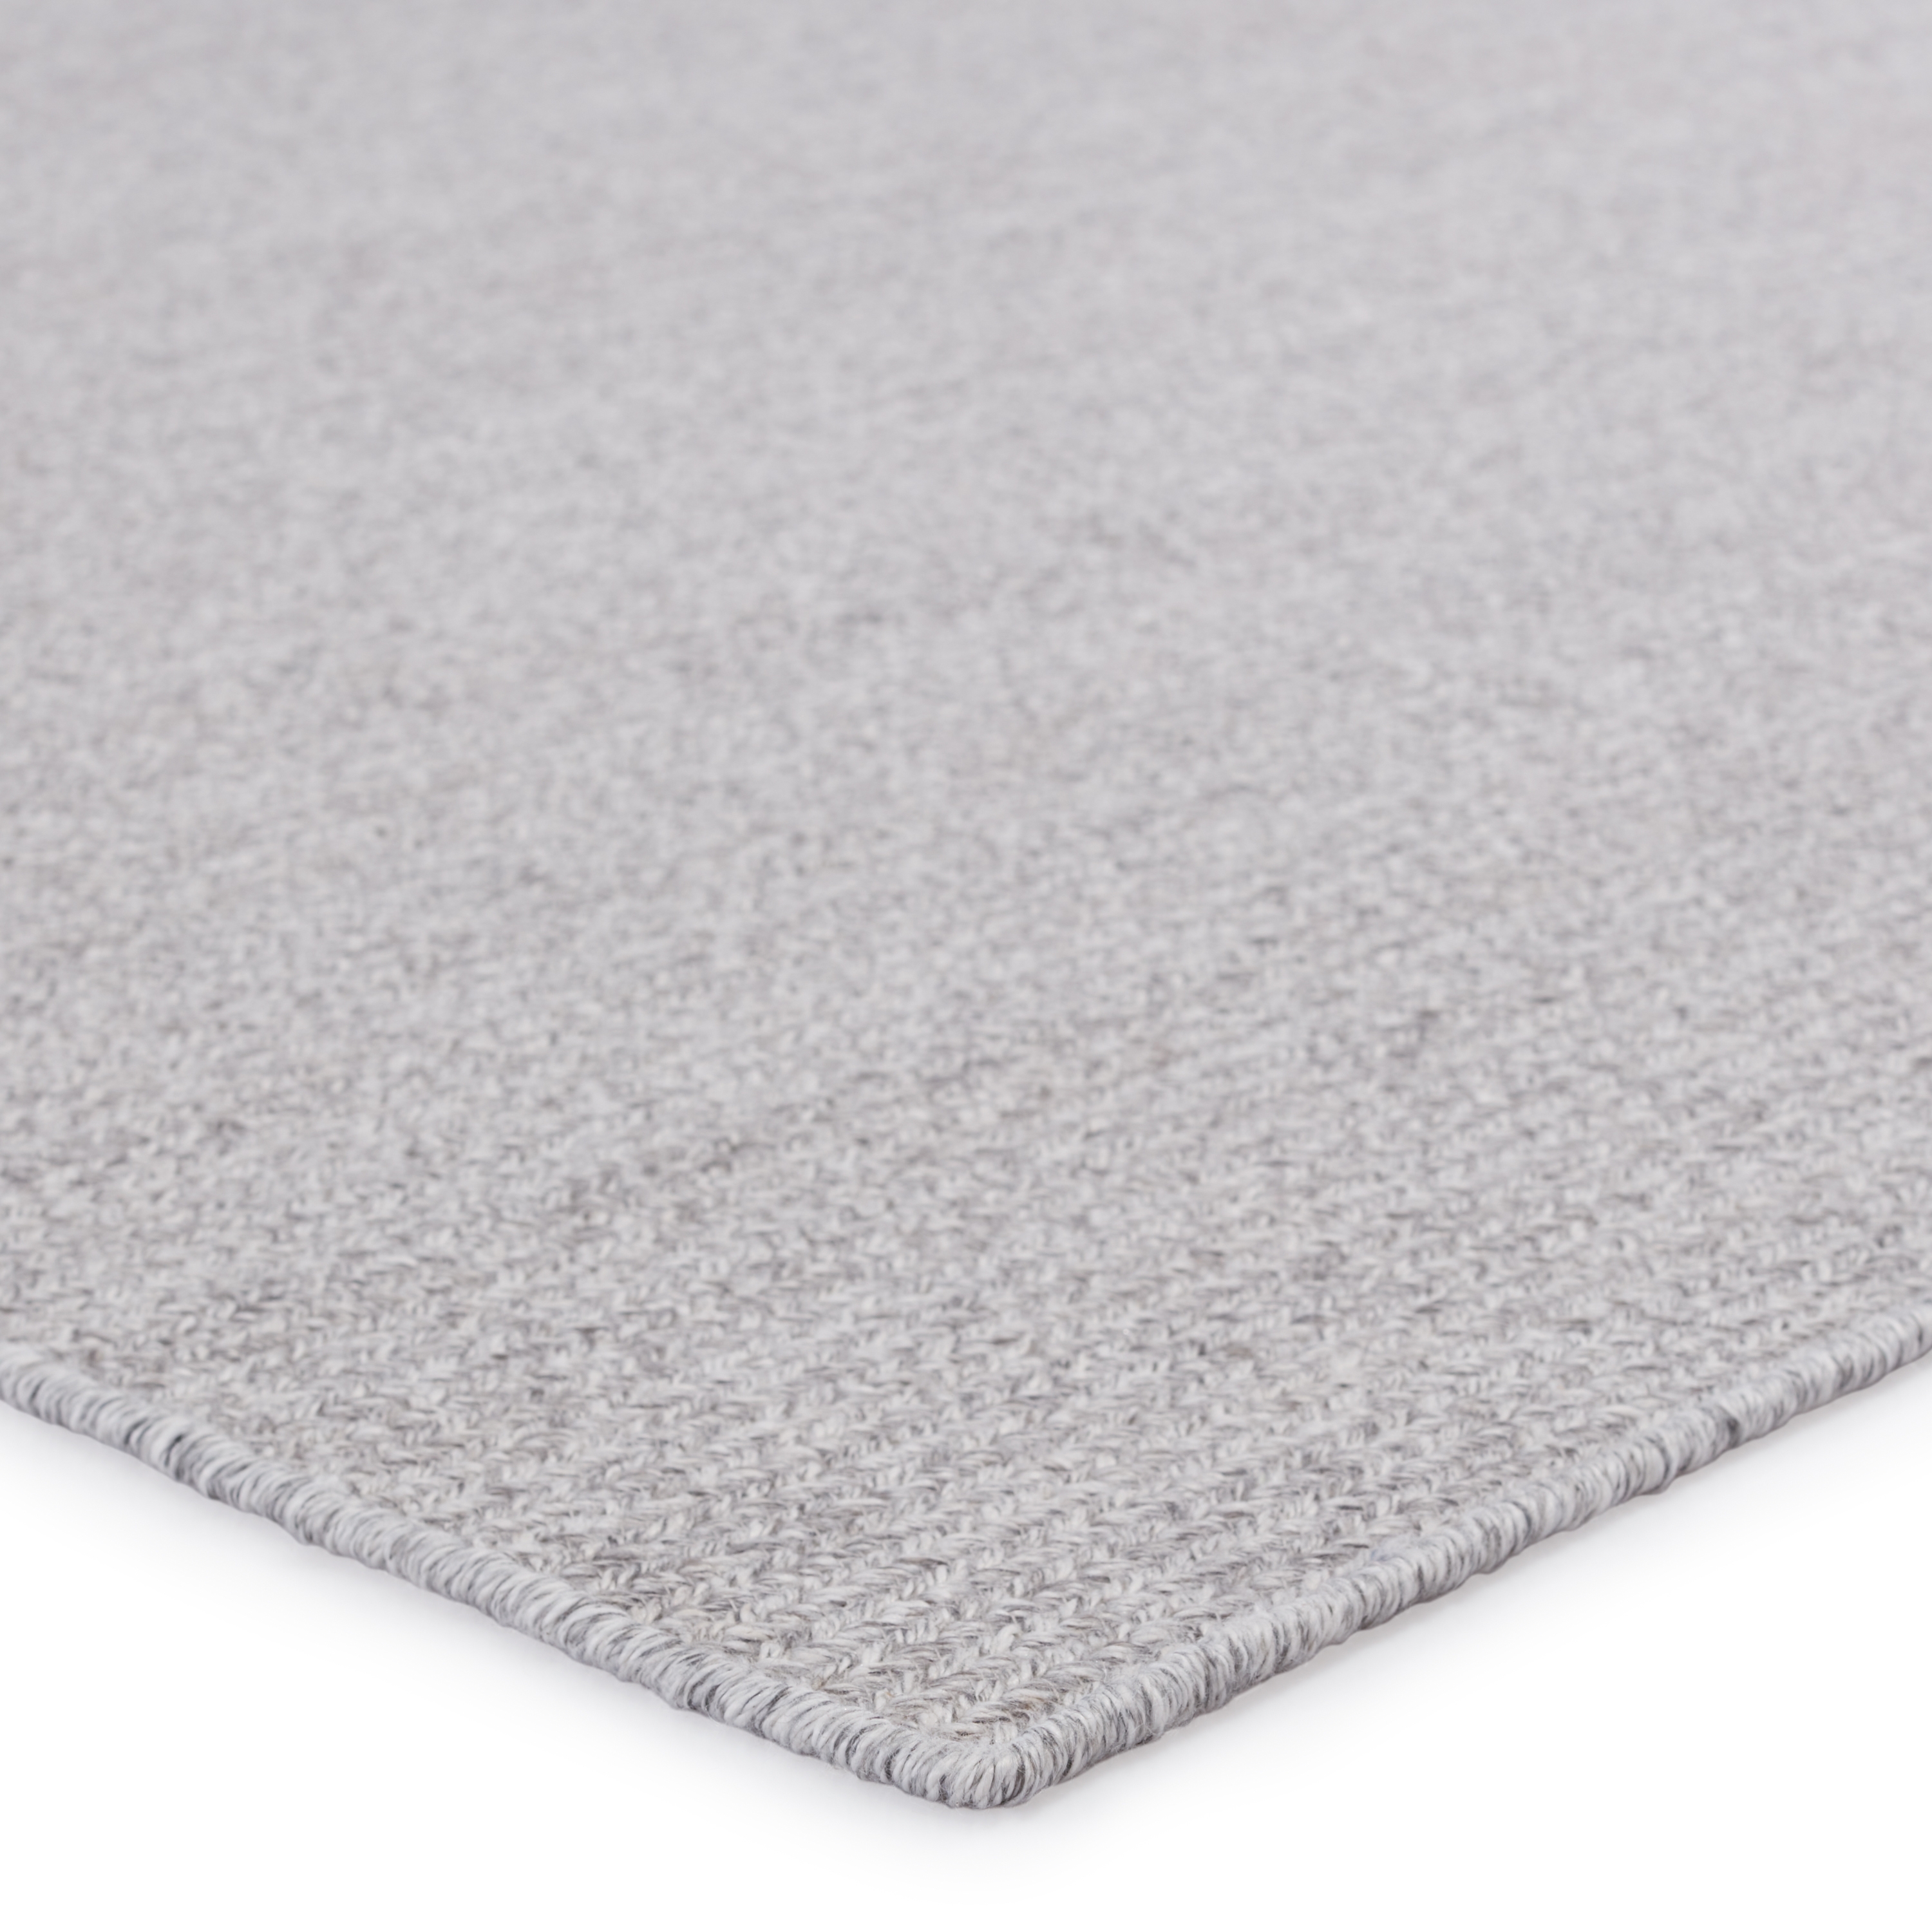 Maracay Indoor/ Outdoor Solid Light Gray/ White Area Rug (4'X6') - Image 1